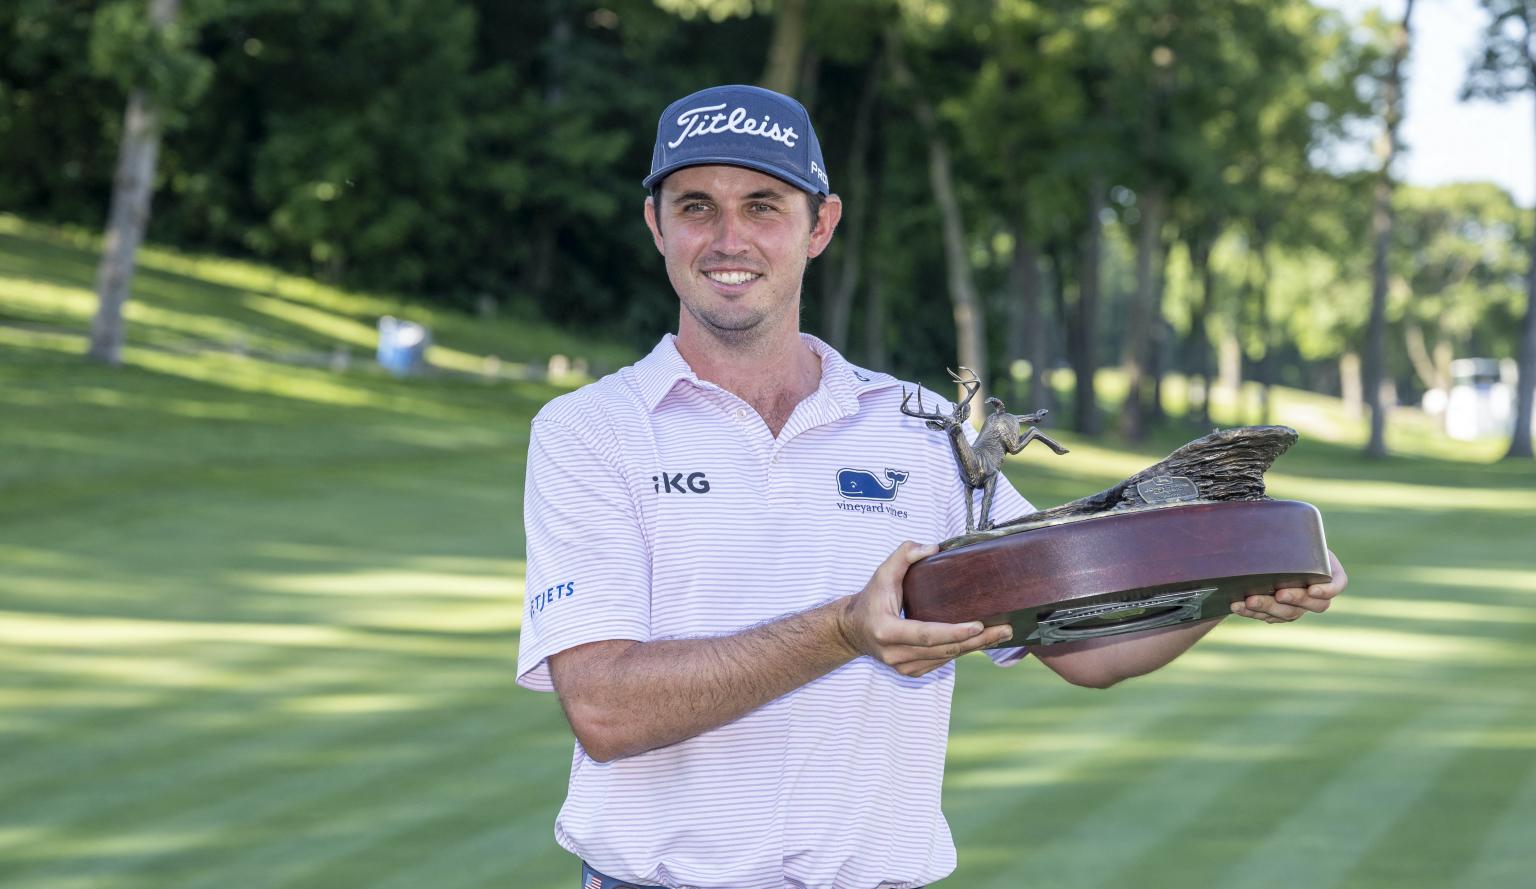 PGA Tour How much did each player win at John Deere Classic? GolfMagic